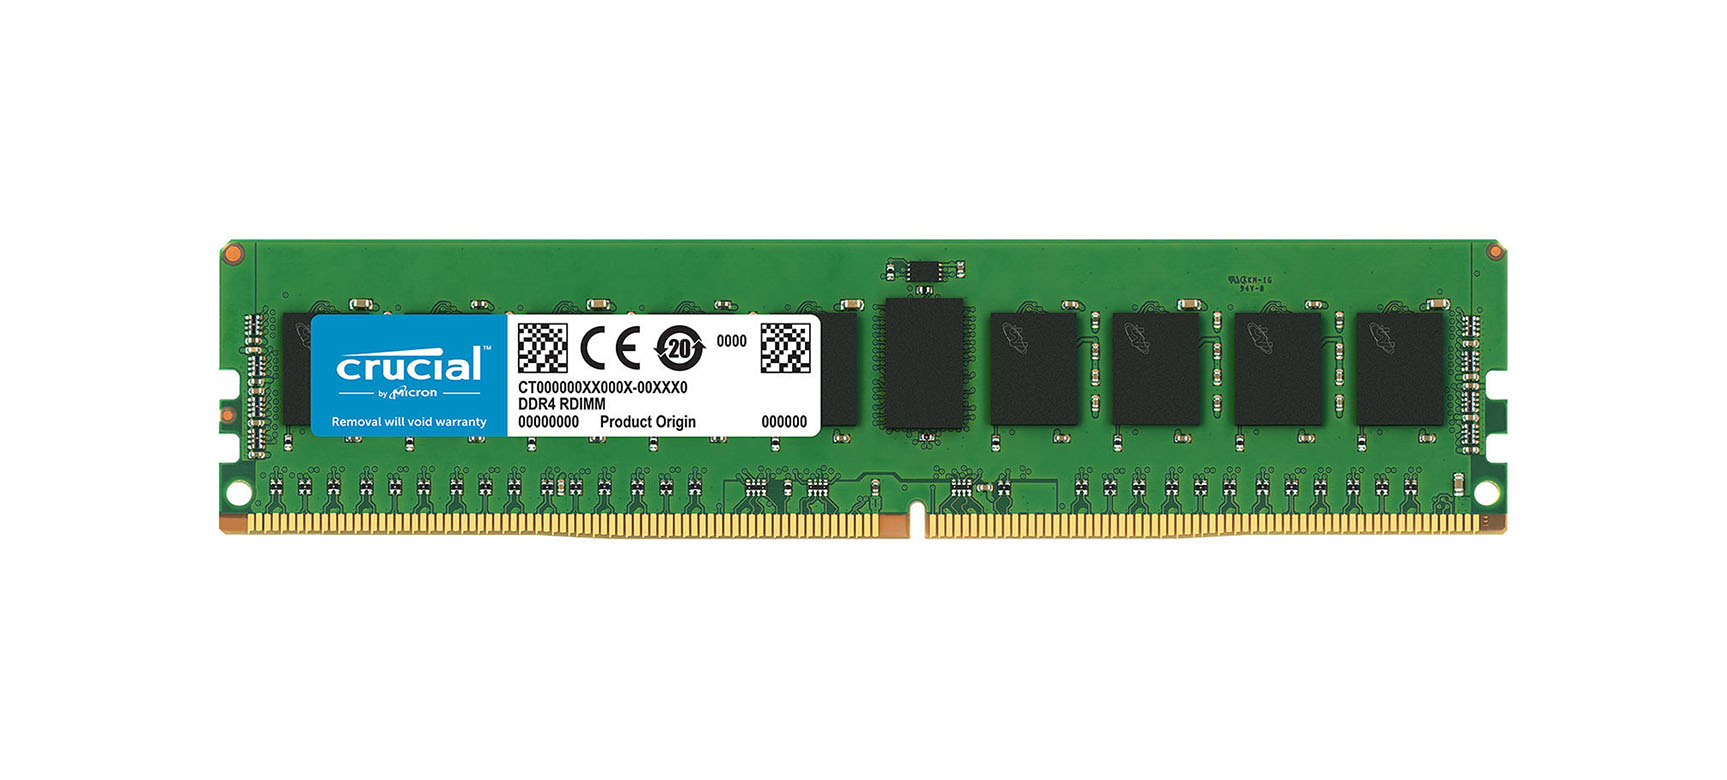 Crucial CT7743604 16GB DDR4-2400MHz PC4-19200 ECC Registered CL17 288-Pin DIMM Single Rank Very Low Profile (VLP) Memory Module Upgrade for HP - Compaq ProLiant BL660c Gen9